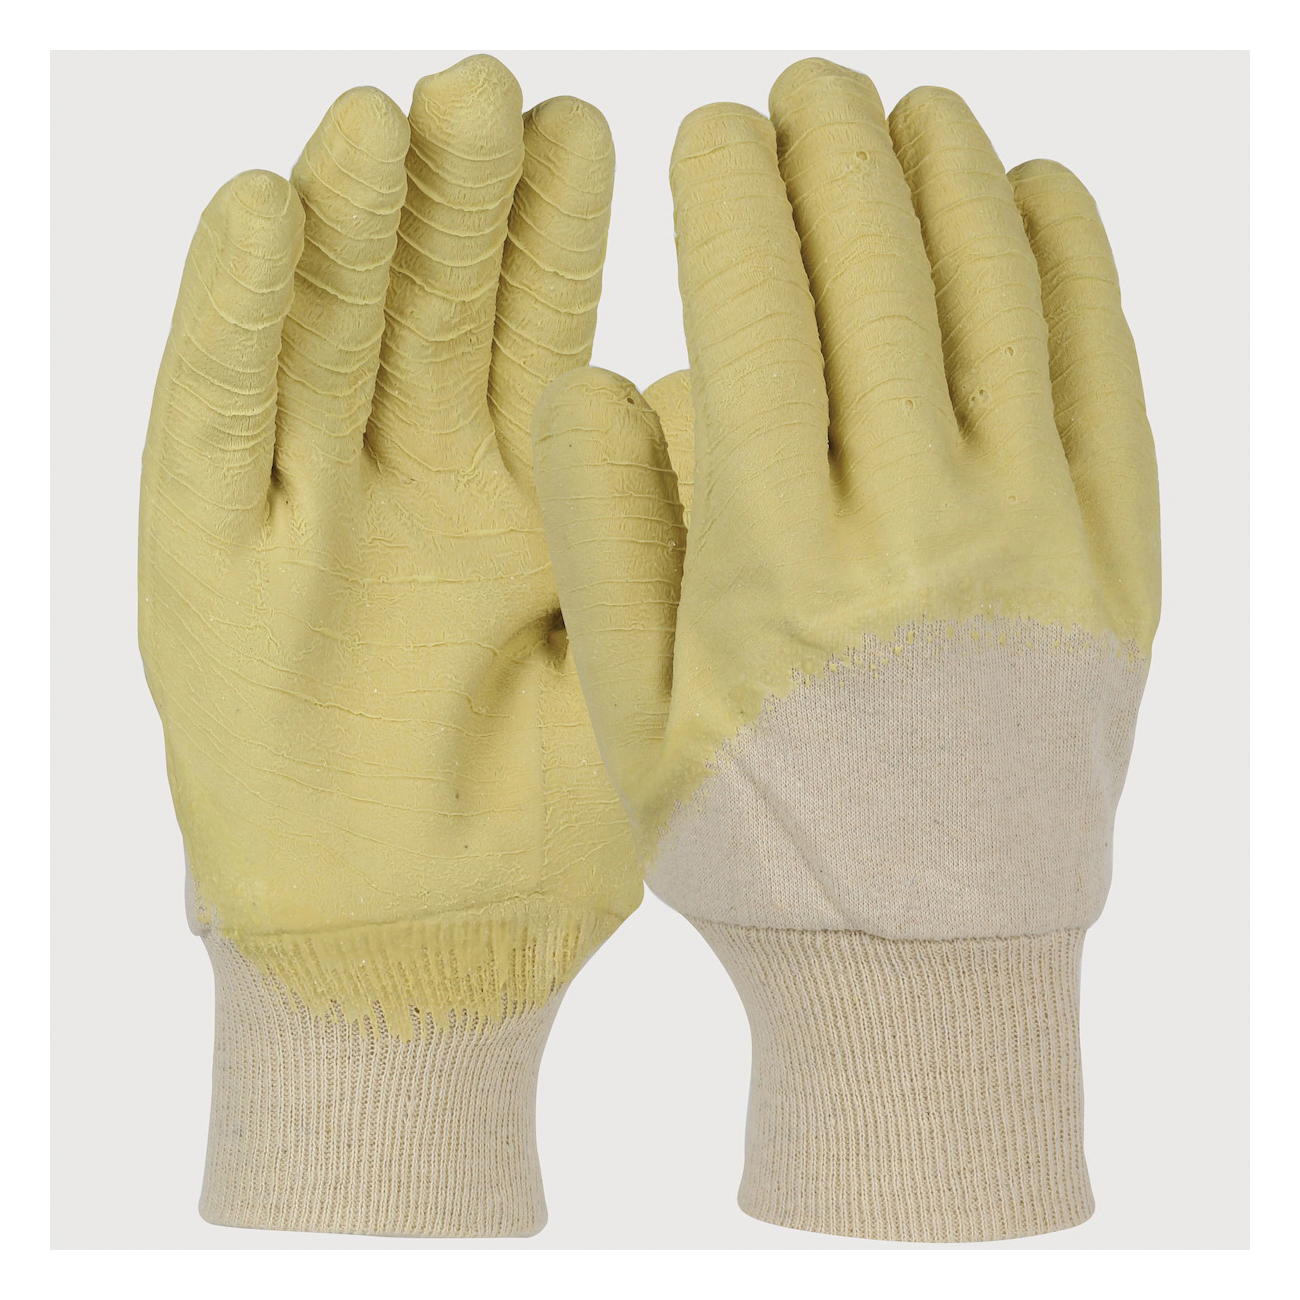 PIP® 3001 Coated Gloves, L, Pair Hand, Natural, Jersey Lining, 10-1/4 in L, Resists: Abrasion, Chemical, Cut and Water, Knitwrist Cuff